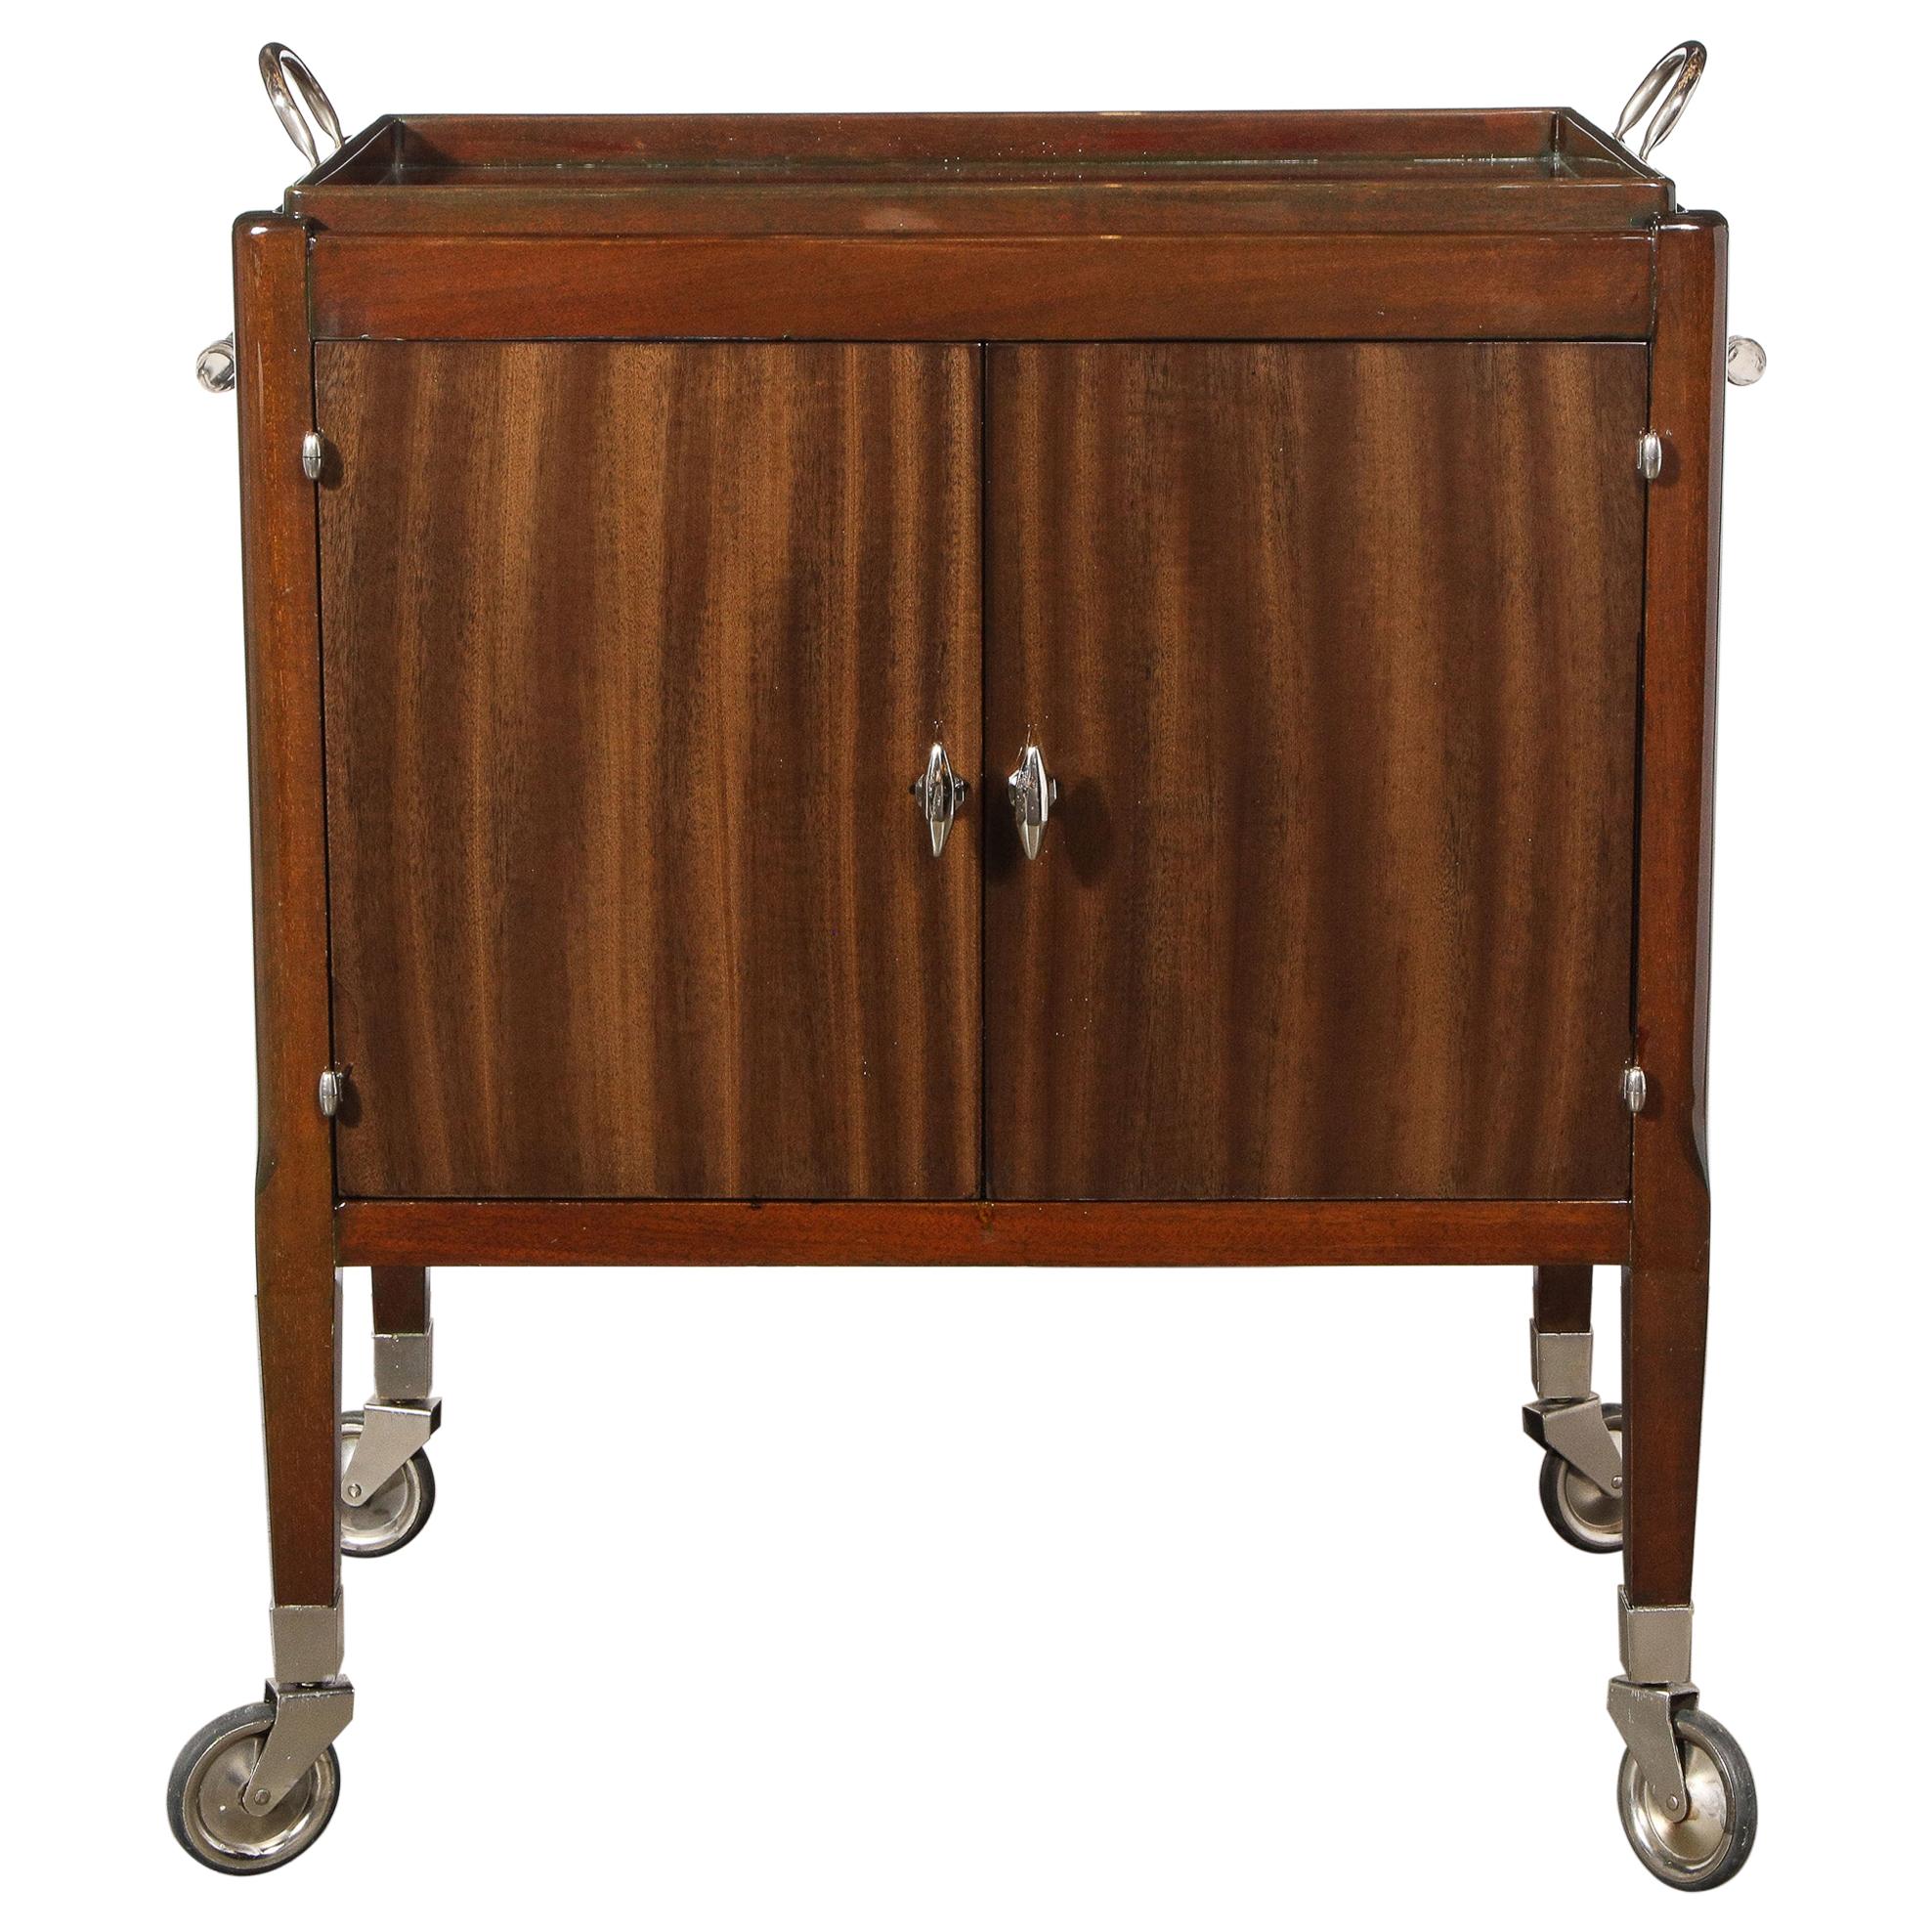 Art Deco Bookmatched Walnut Bar Cart with Nickeled Details & Removable Tray